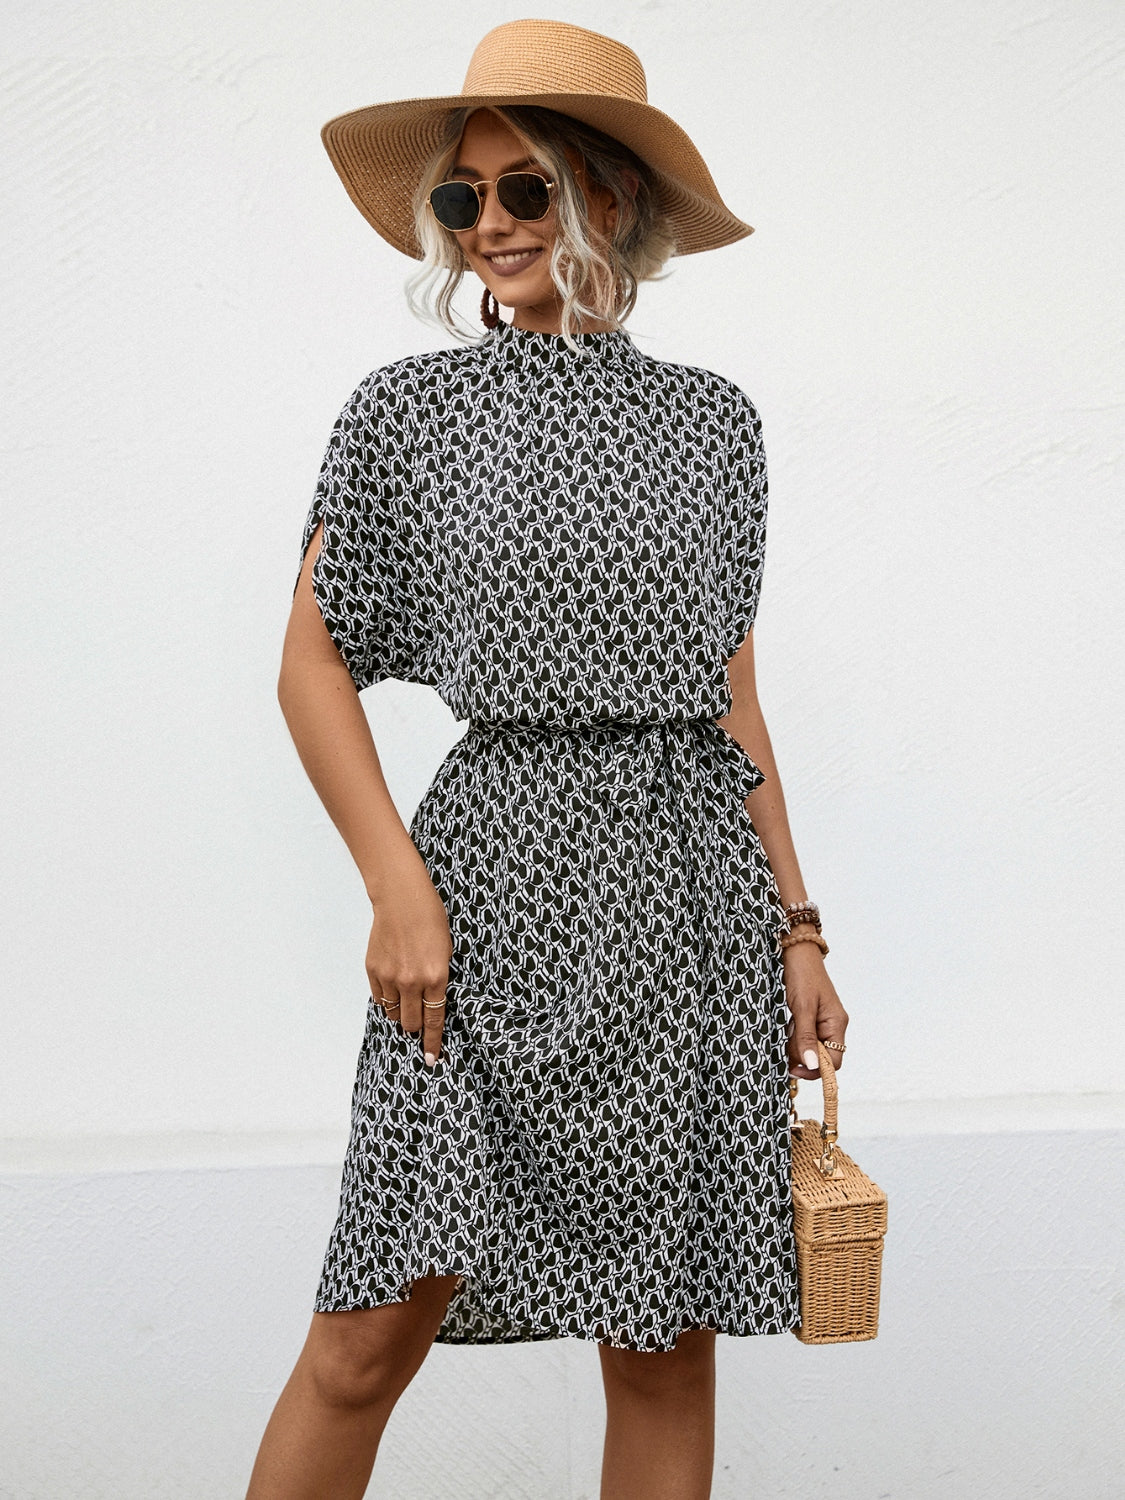 Elegant Tied Printed Mock Neck Dress for Women Over 50 - Summer Beach Wedding Guest Party Attire